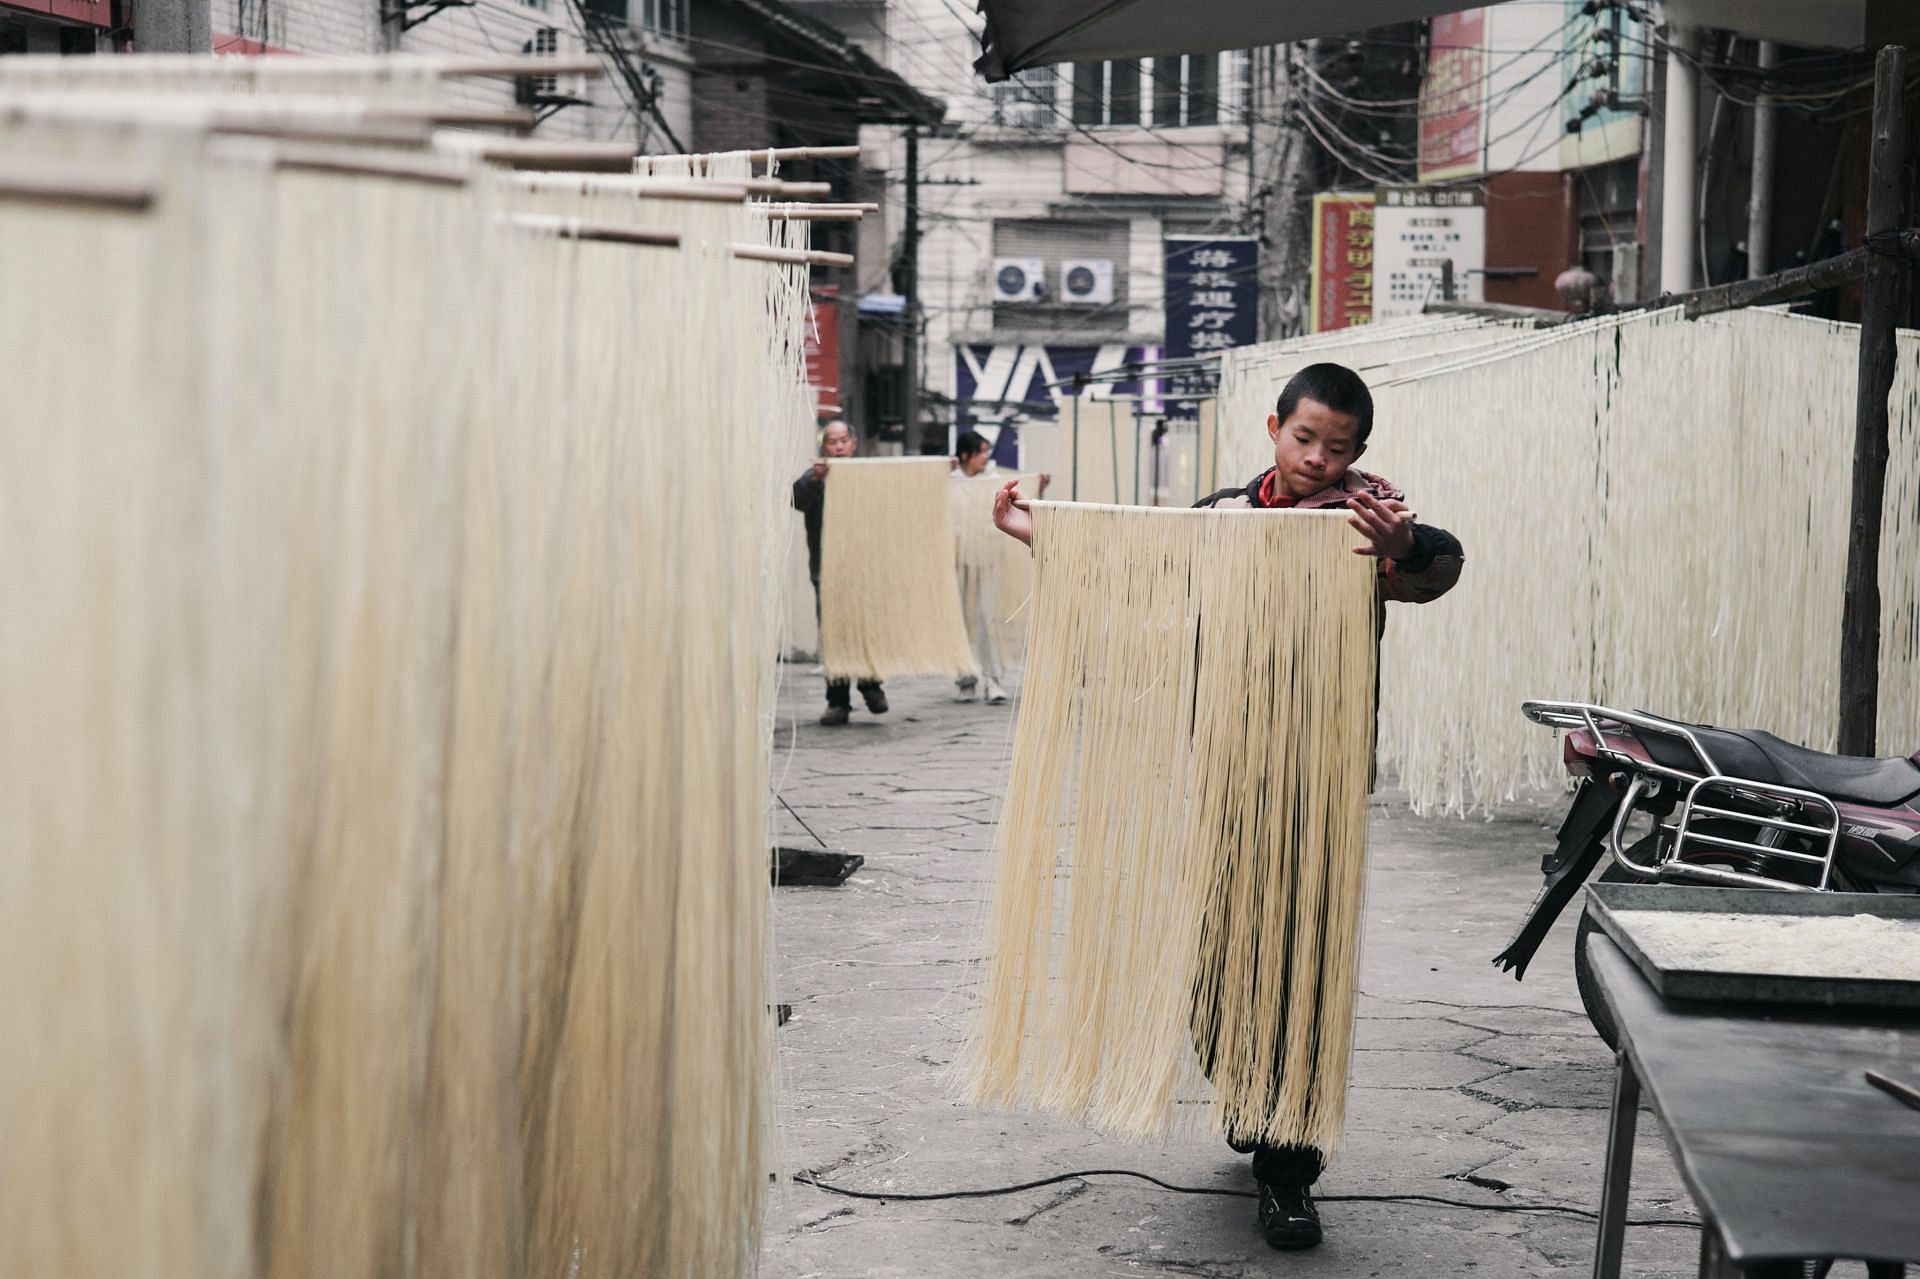 These noodles are hand-made. (Image via Unsplash / Woody Yan)